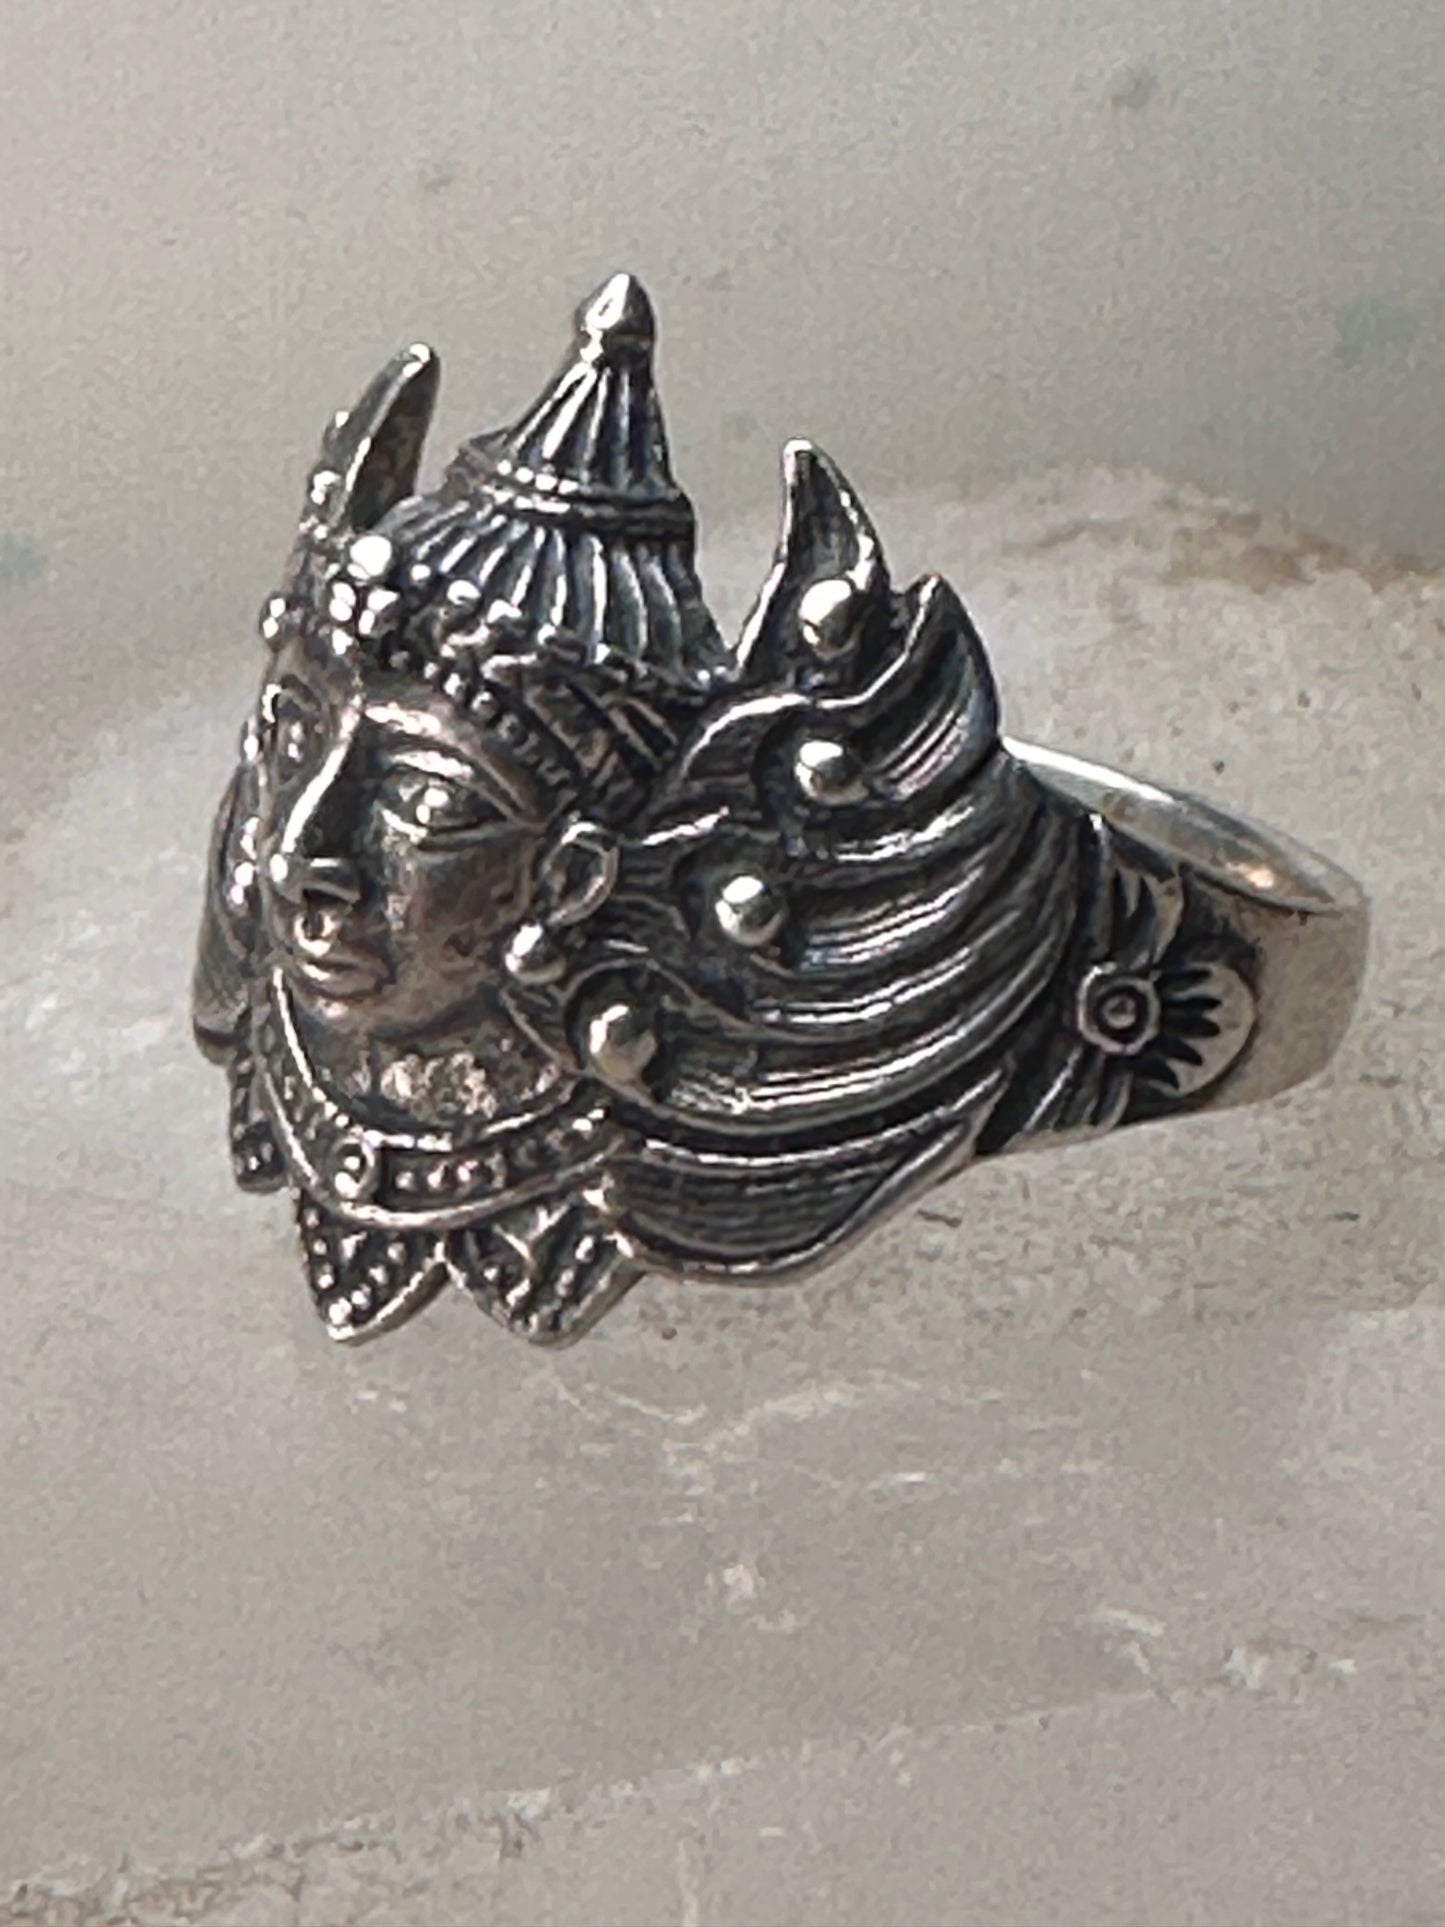 Winged Goddess ring face deity band  size 7.75 sterling silver women